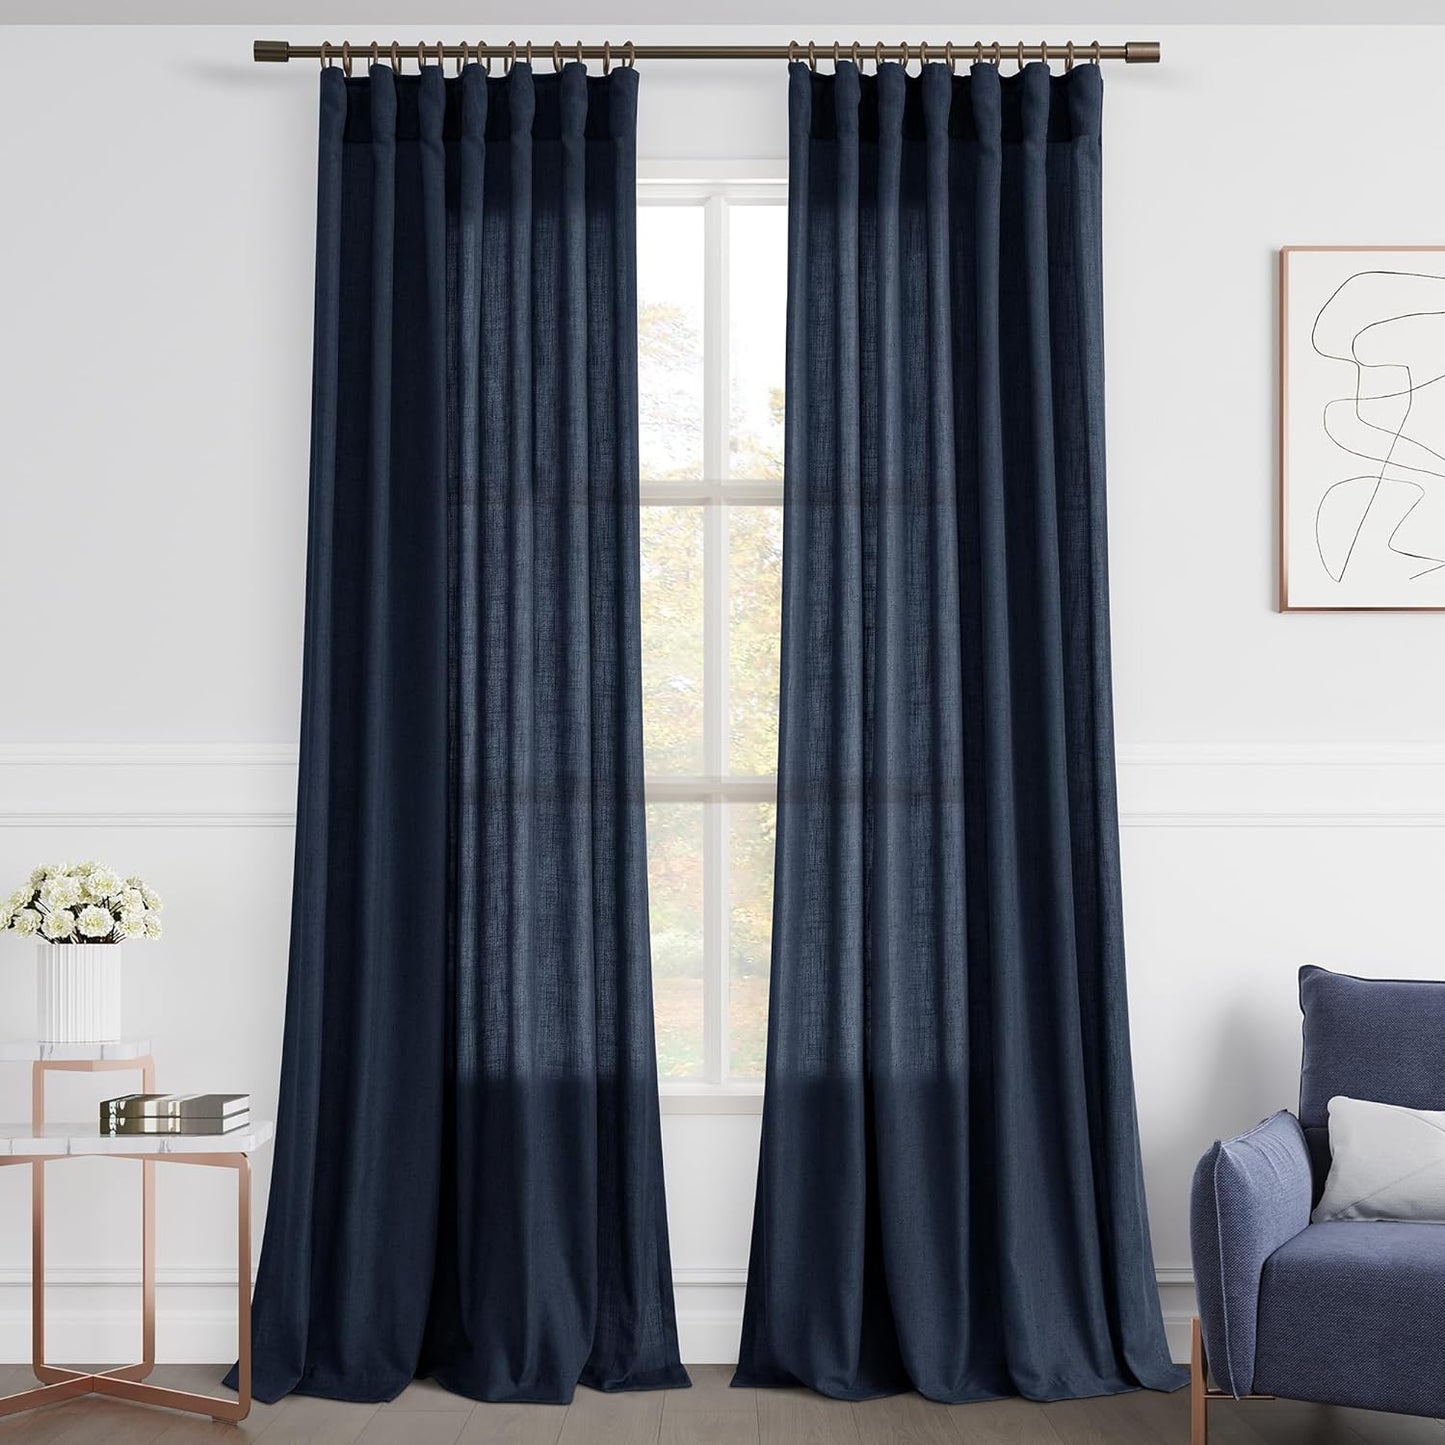 Joywell Natural Linen Cream Curtains 84 Inches Long for Living Room Bedroom Hook Belt Back Tab Pinch Pleated Light Filtering Ivory White Neutral Boho Modern Farmhouse Linen Drapes 84 Length 2 Panels  Joywell Navy Blue 52W X 120L Inch X 2 Panels 